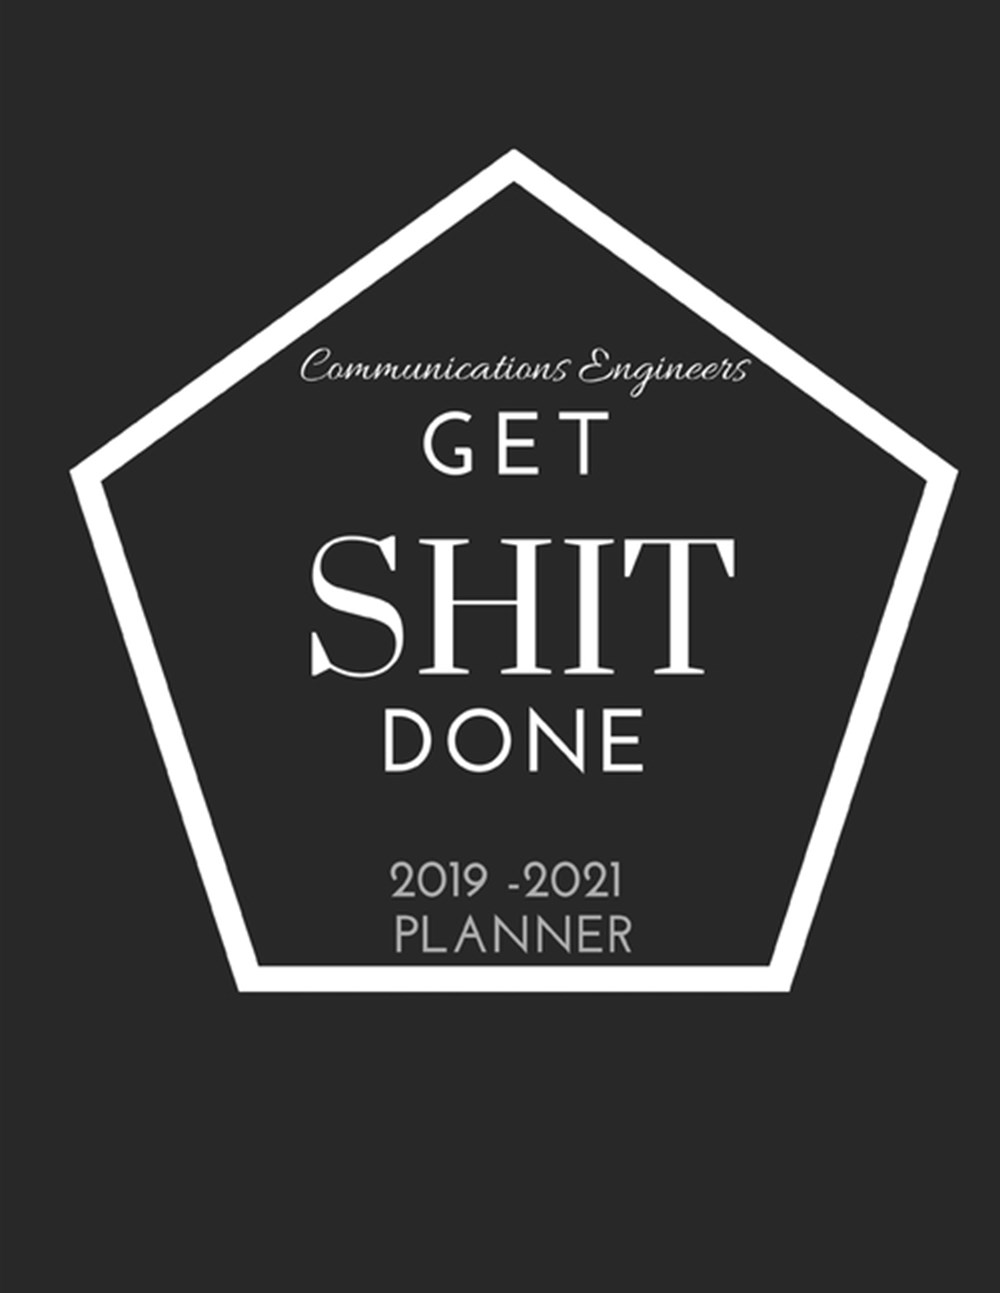 Communications Engineers Get SHIT Done 2019 - 2021 Planner 2 - 3 Year Organizer for Professionals: F